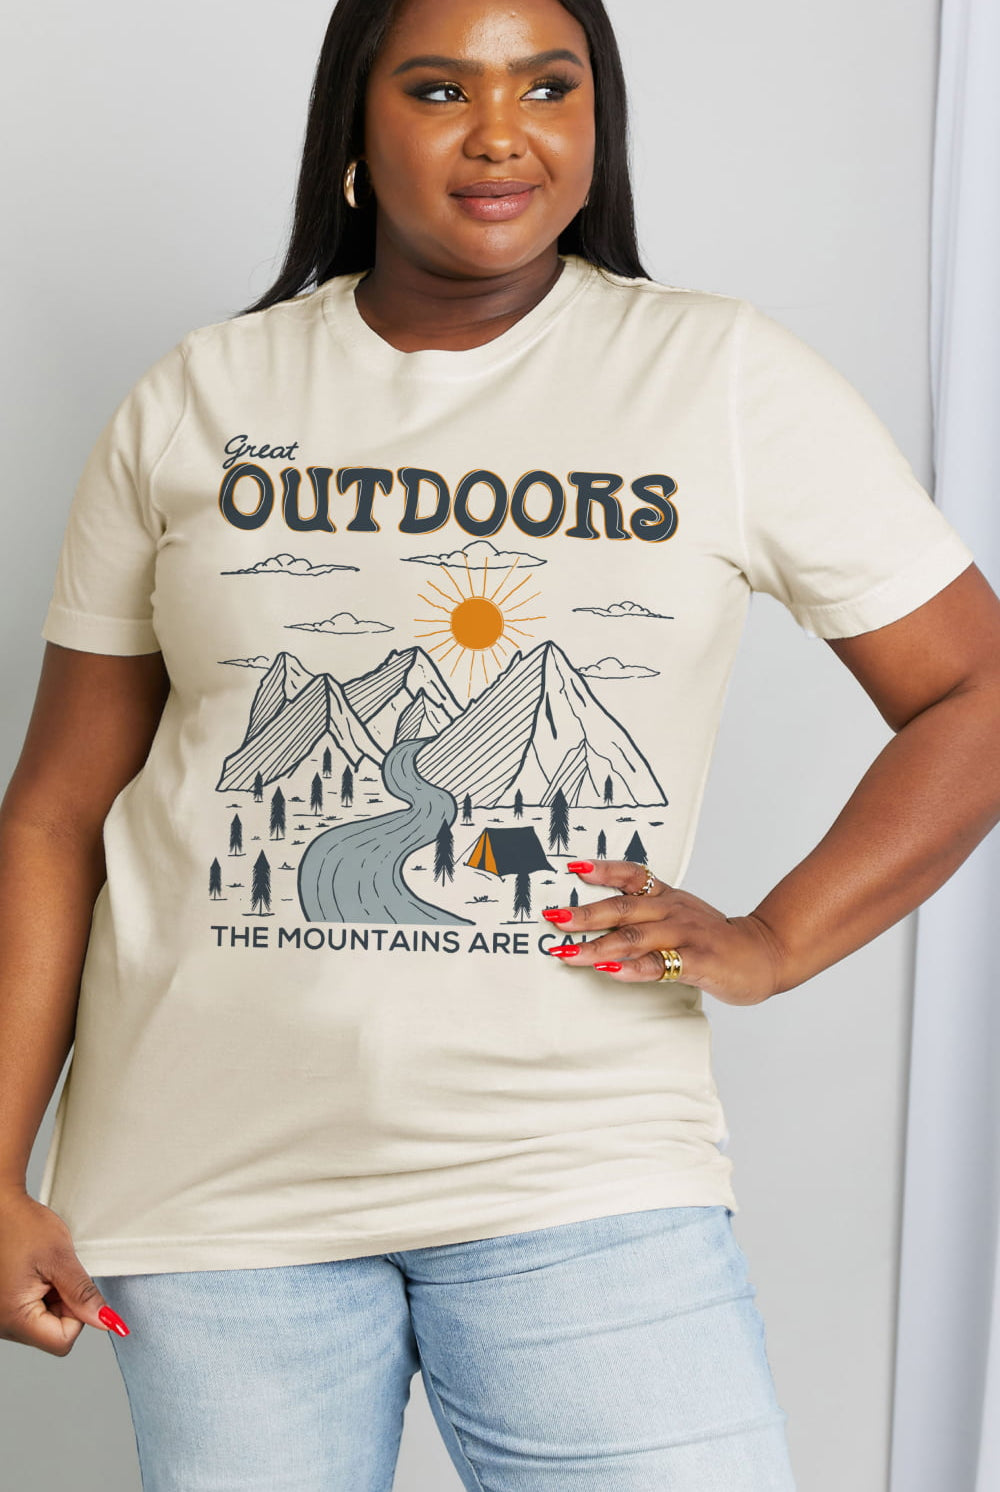 Light Gray Simply Love Full Size GREAT OUTDOORS Graphic Cotton Tee Tops